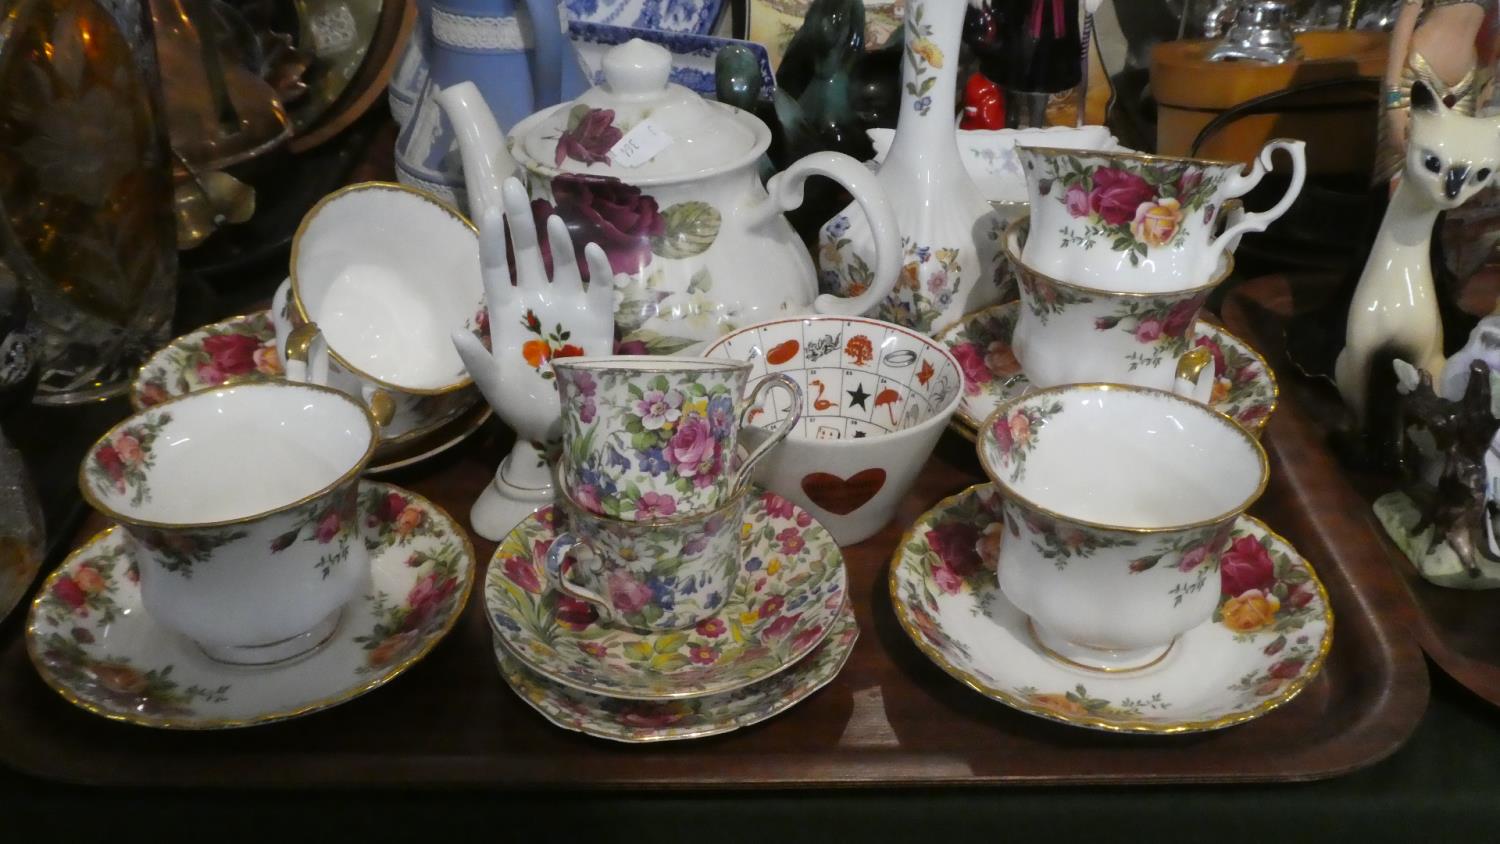 A Tray of Ceramics to Include Five Royal Albert Old Country Rose Teacups and Saucers, Pair of Summer